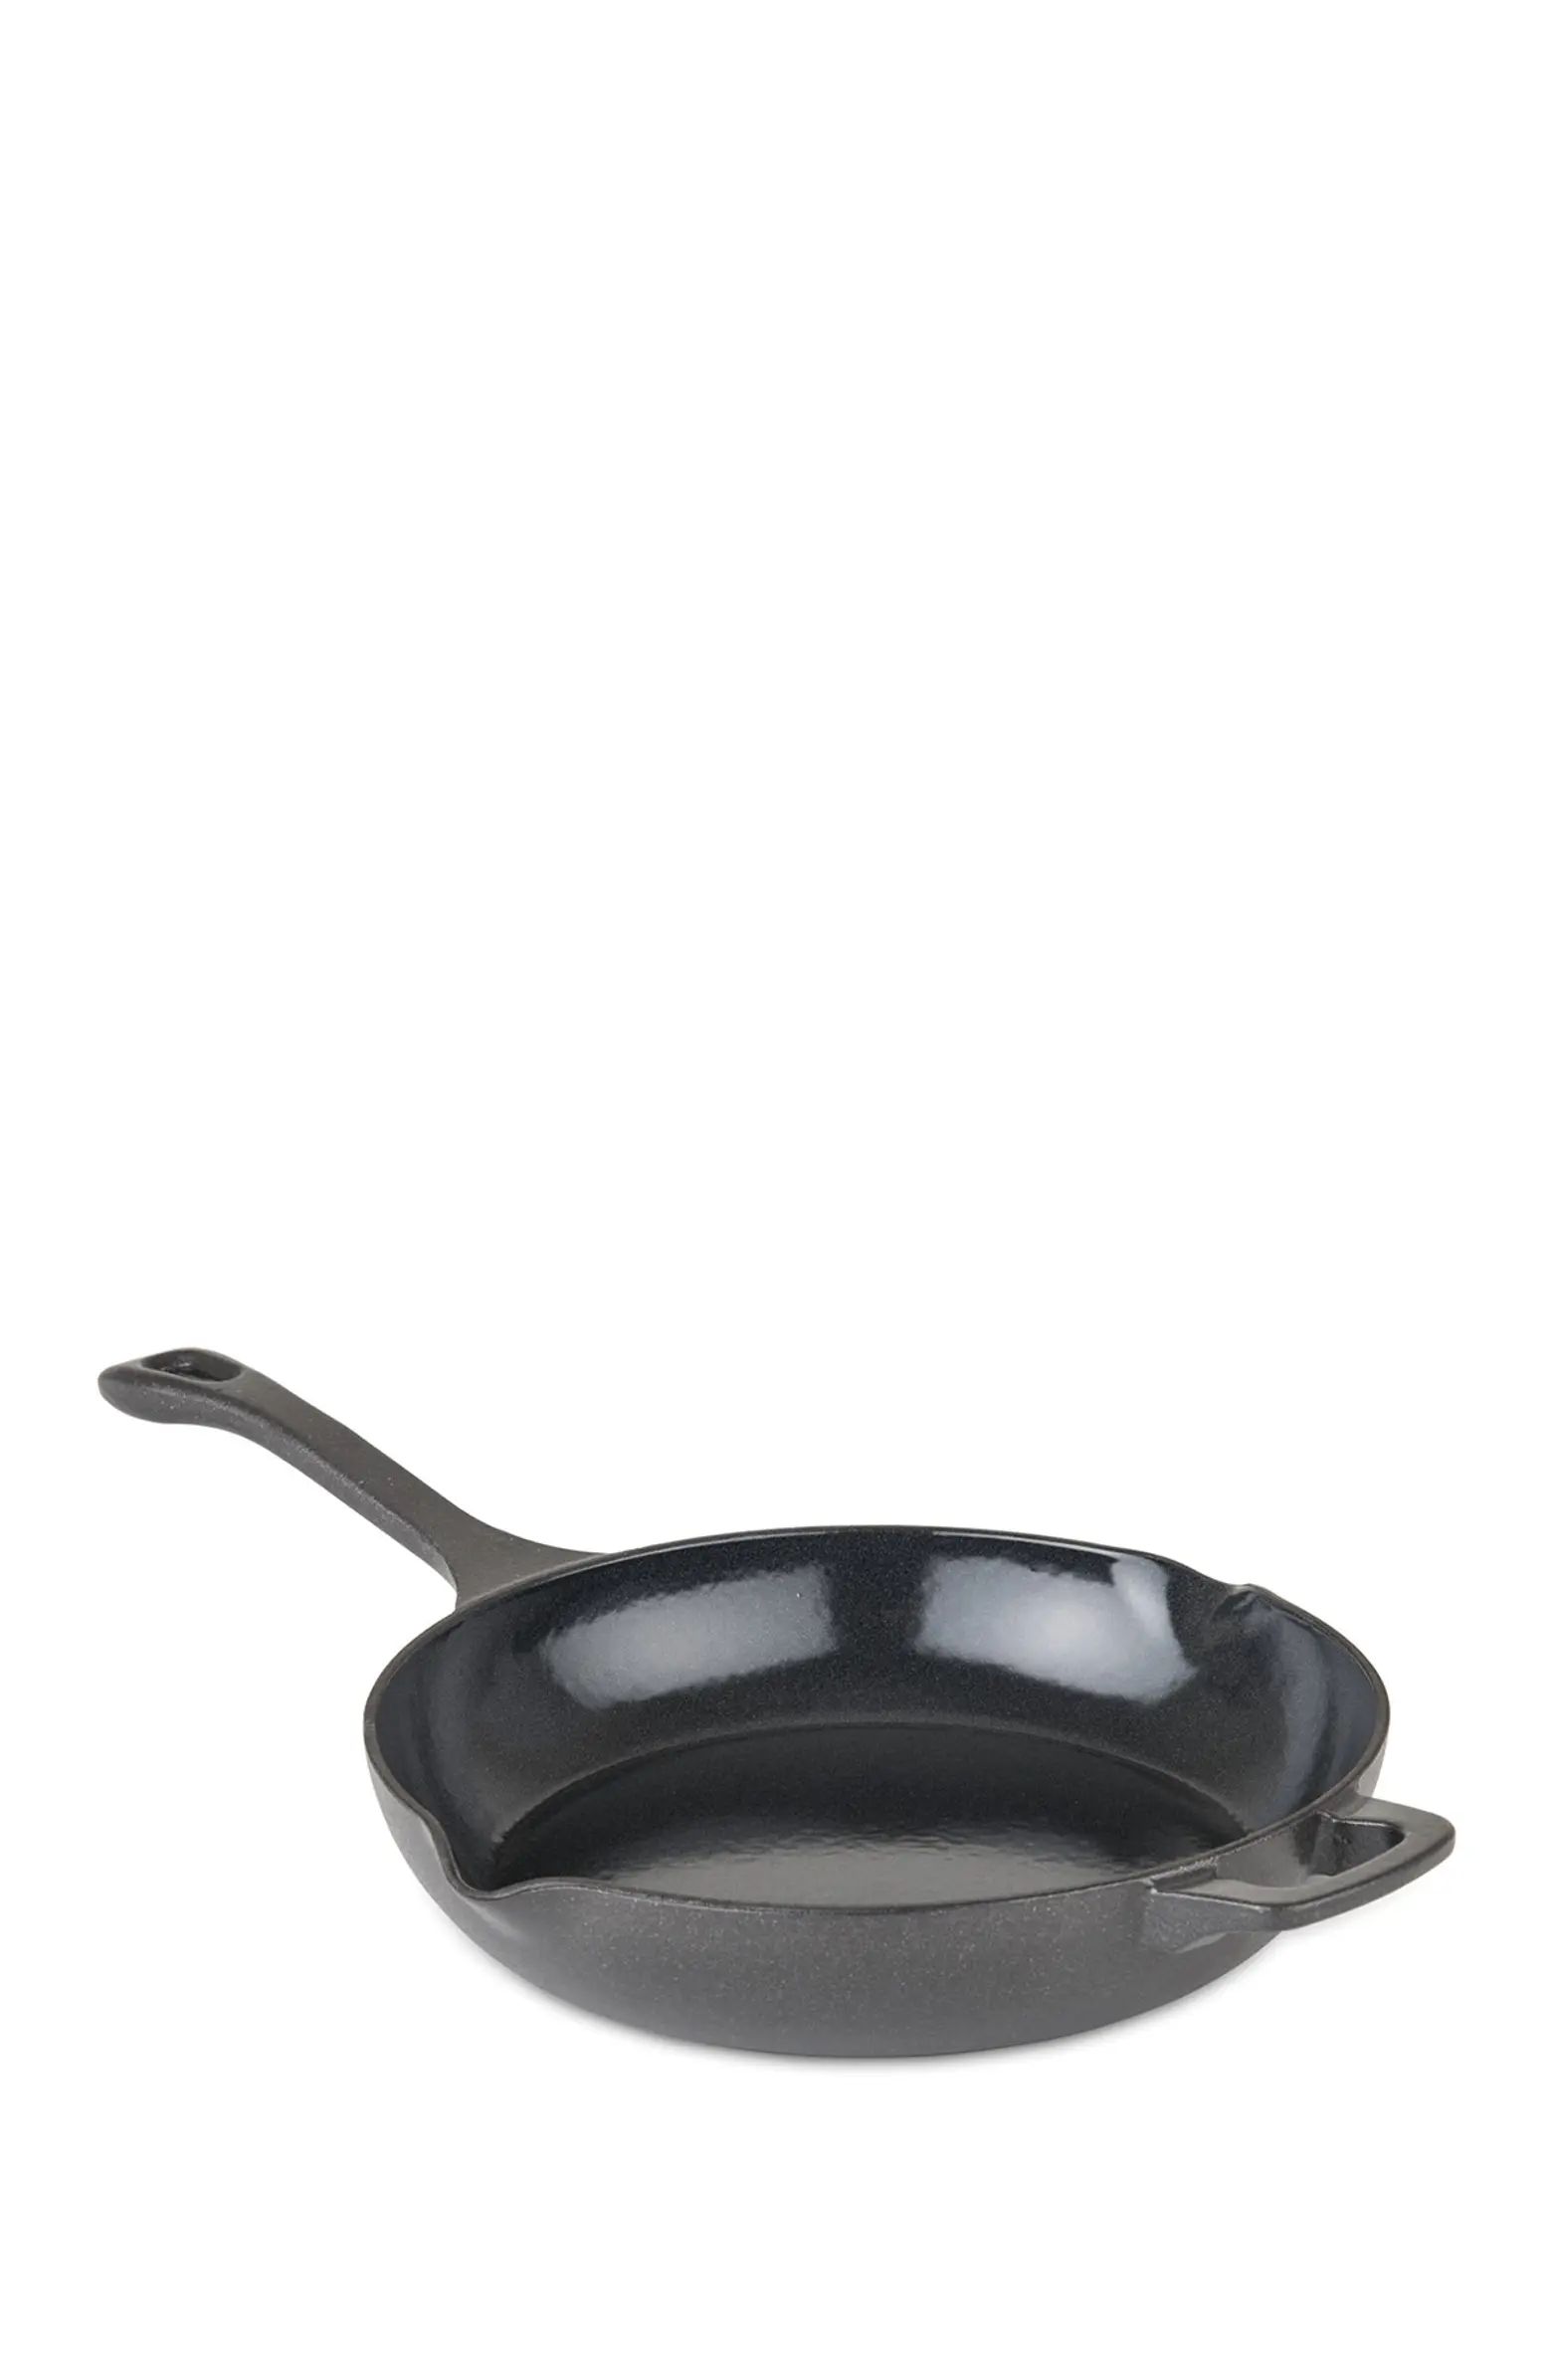 10.5-Inch Cast Iron Chef's Pan with Spouts | Nordstrom